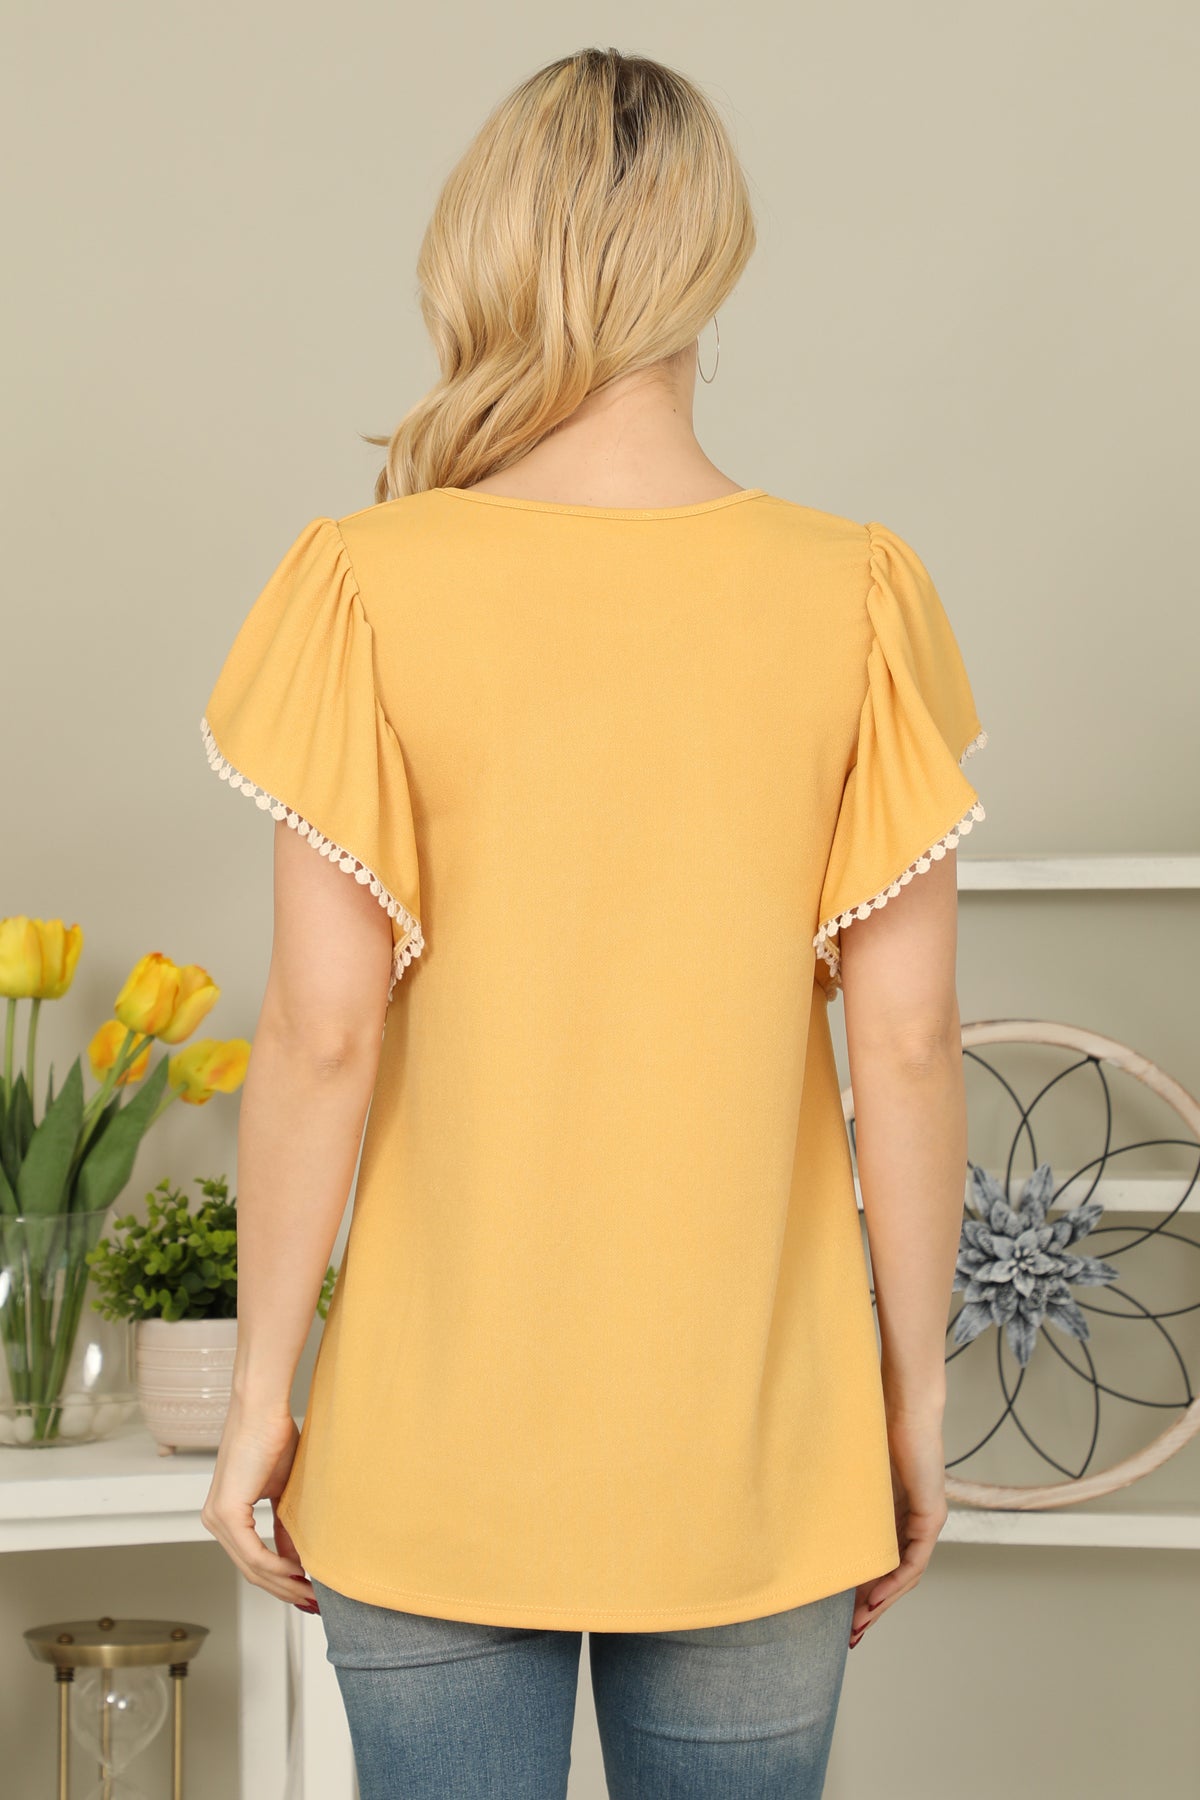 POMPOM DETAIL BUTTERFLY SLEEVE TOP 1-2-2-2